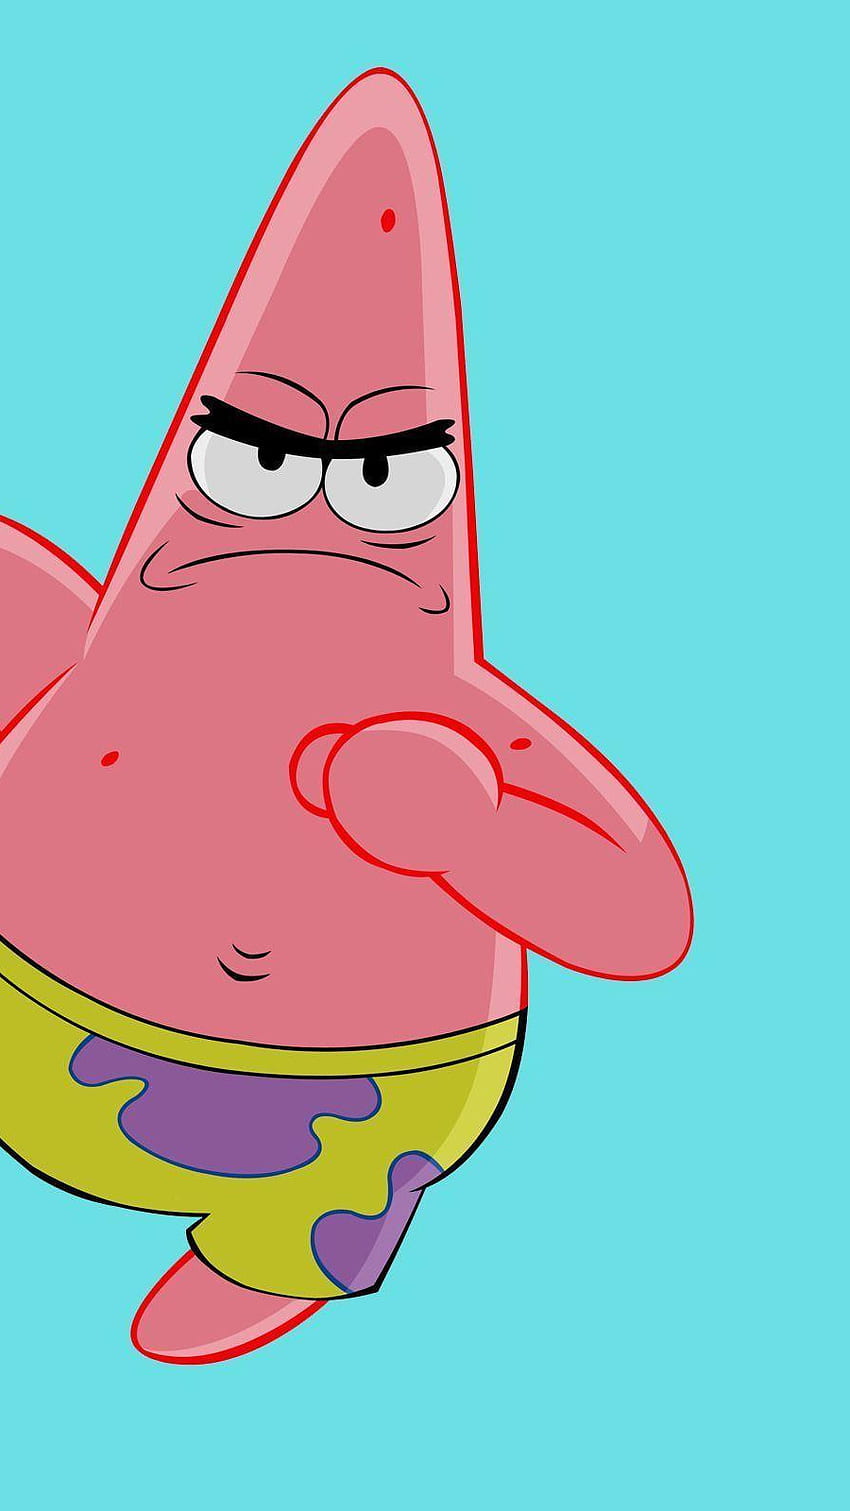 patrick star mad faces